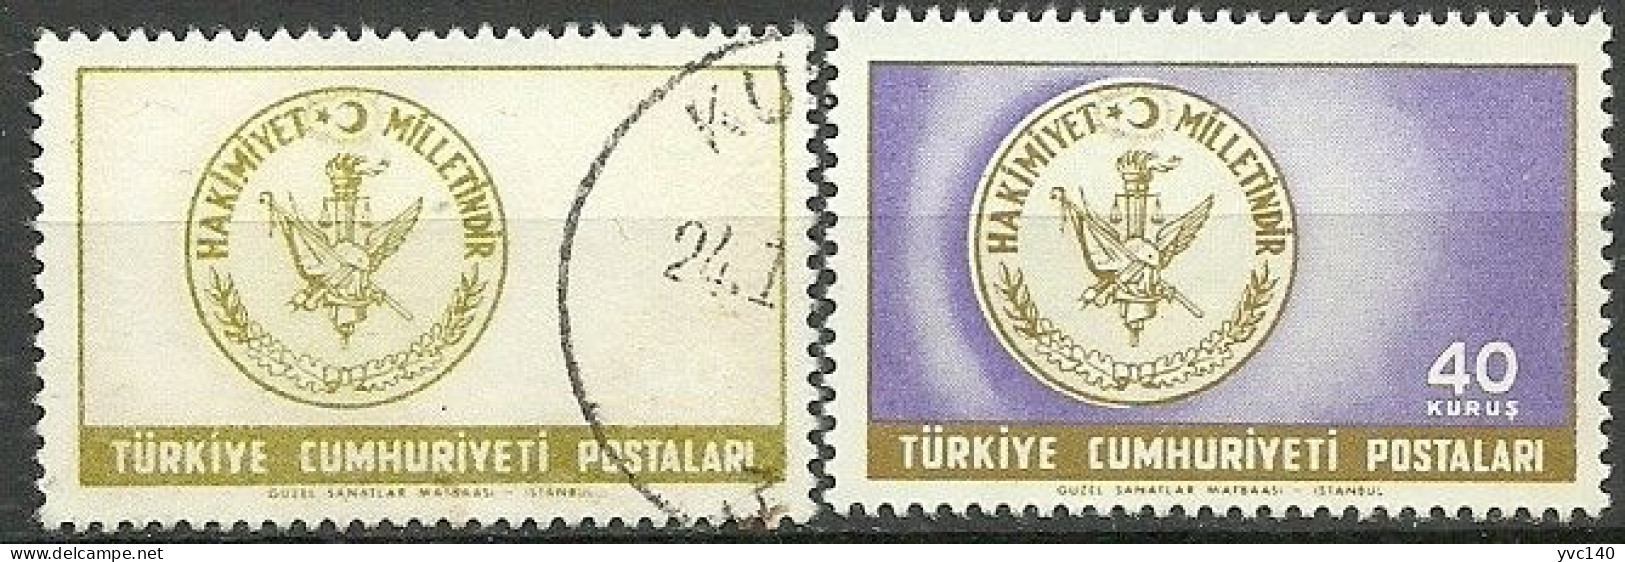 Turkey; 1960 Yassiada Lawsuit Hearings 40 K. ERROR "Background Color Is Missing" - Used Stamps